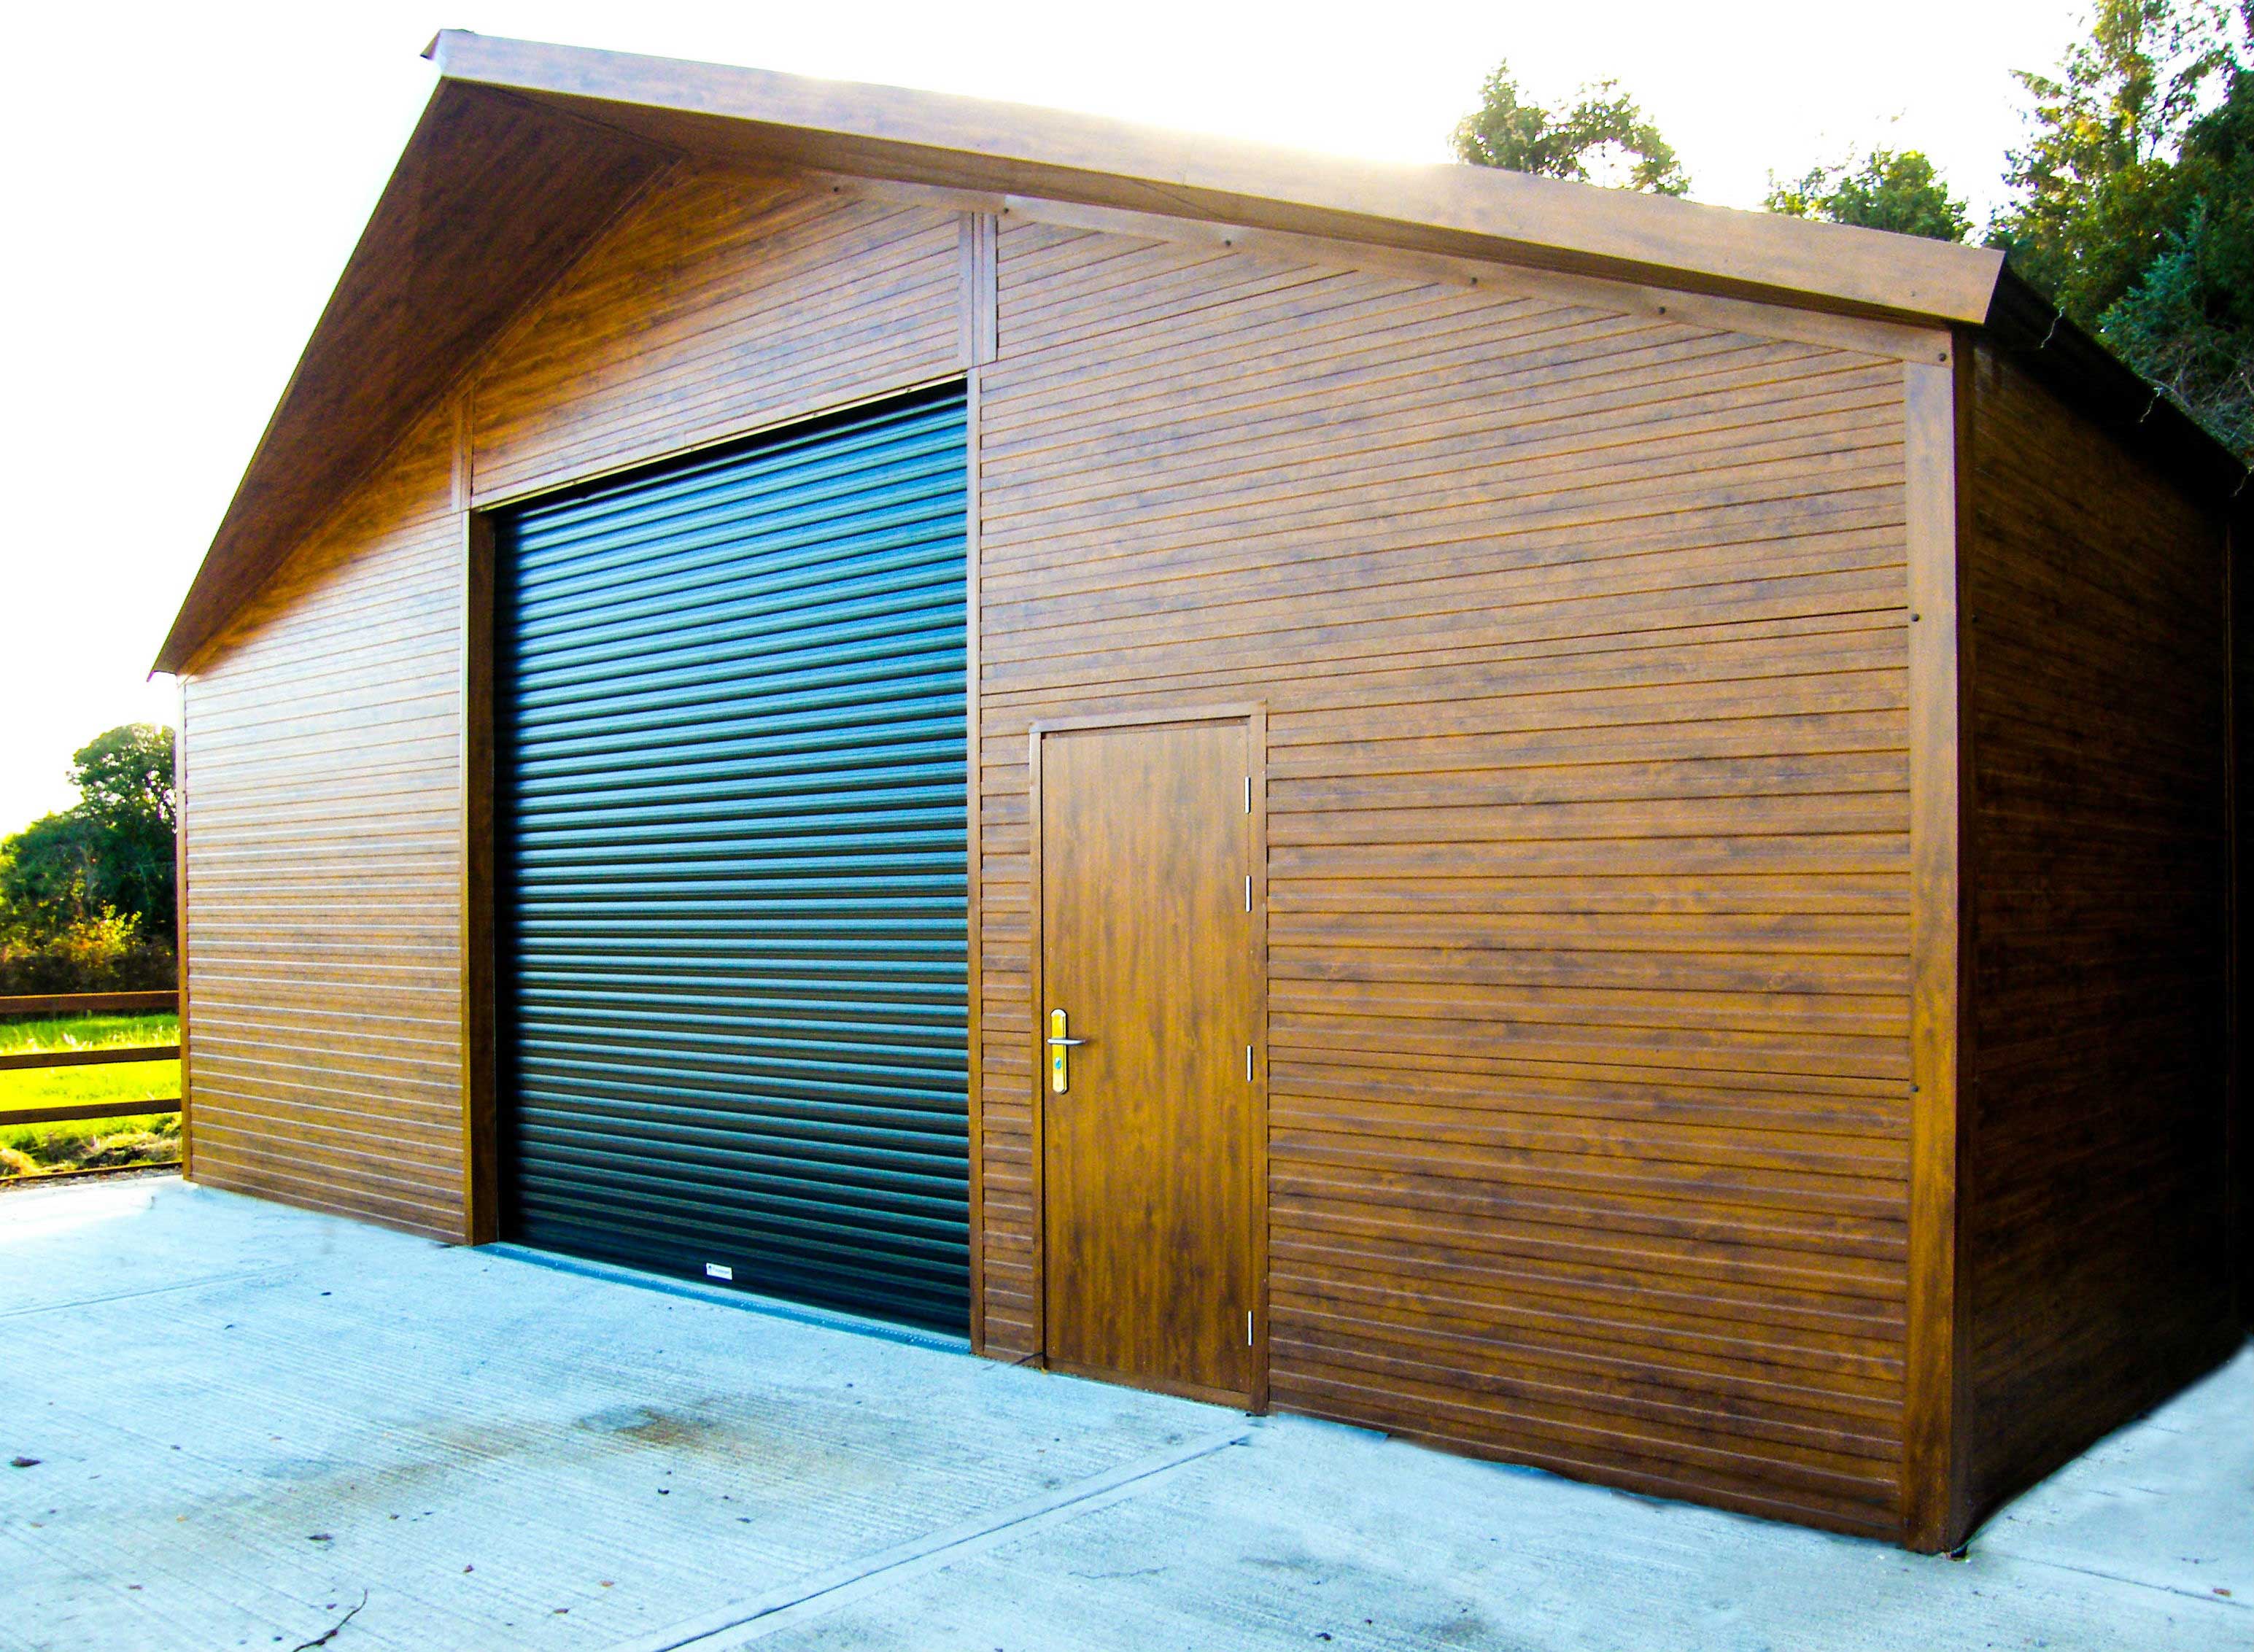 UK’s Professional Insulated Garages Supplier | Get a Quote